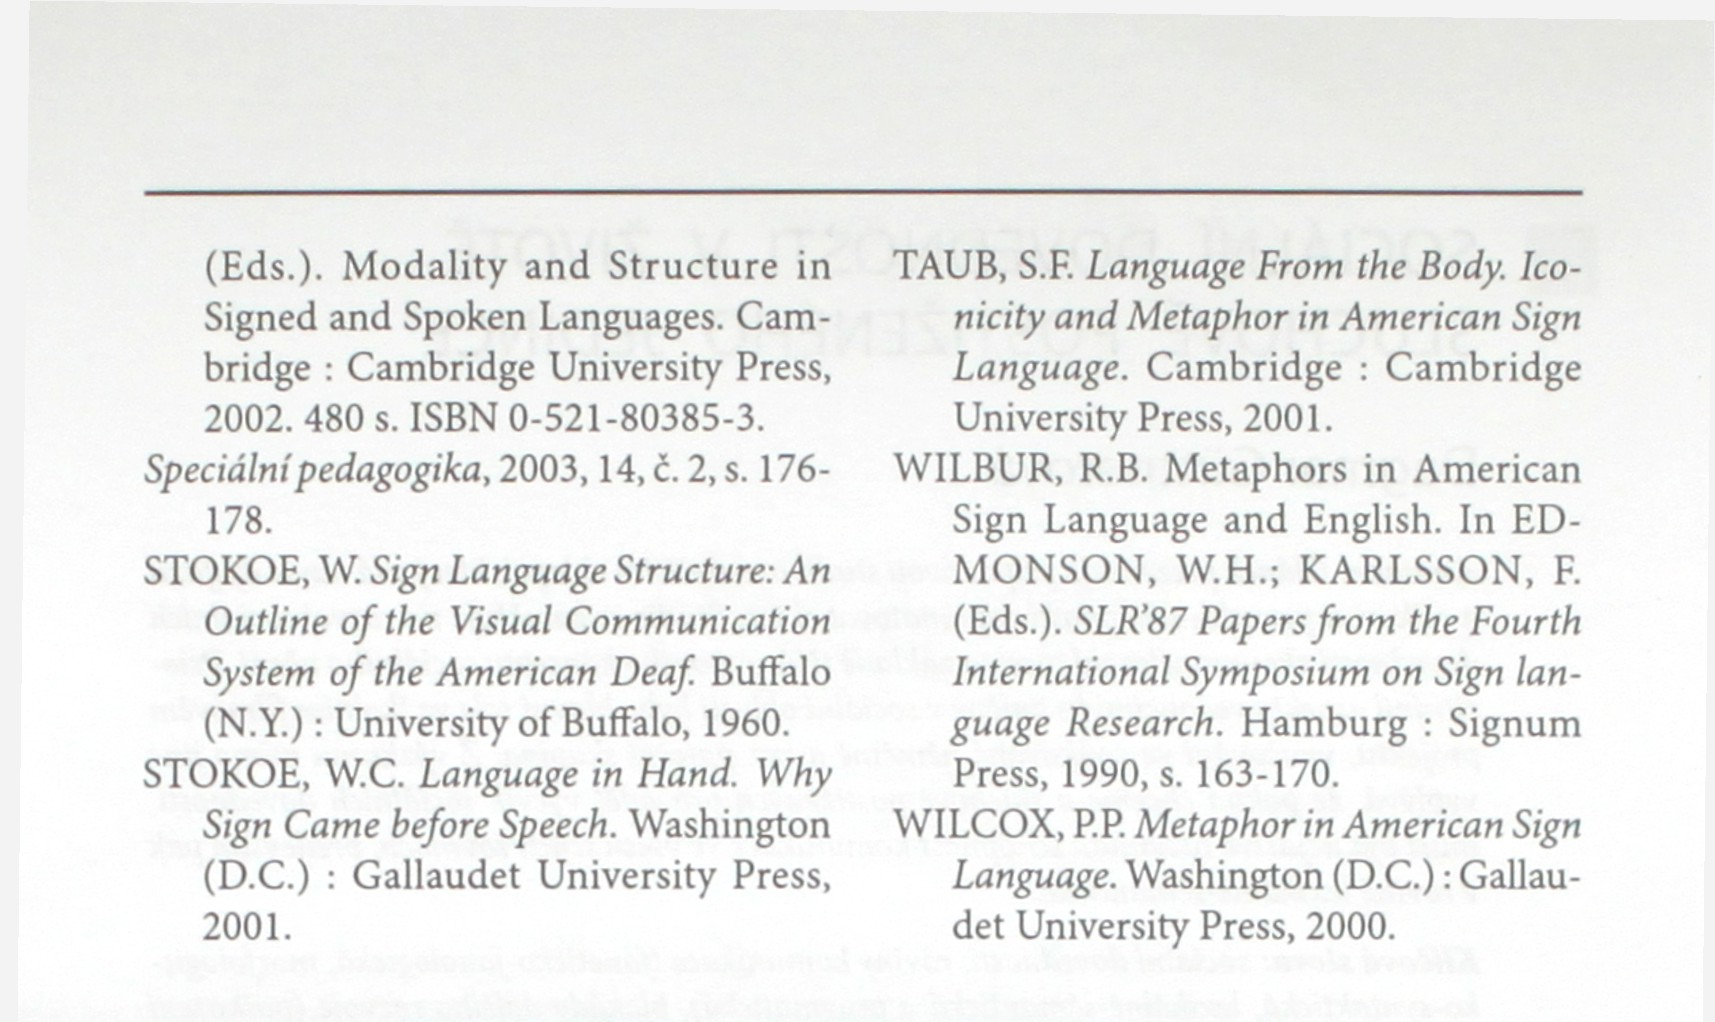 Why Sign Came before Speech. Washington (D.C.) : Gallaudet University Press, 2001. TAUB, S.F. Language From the Body. konicity and Metaphor in American Sign Language.